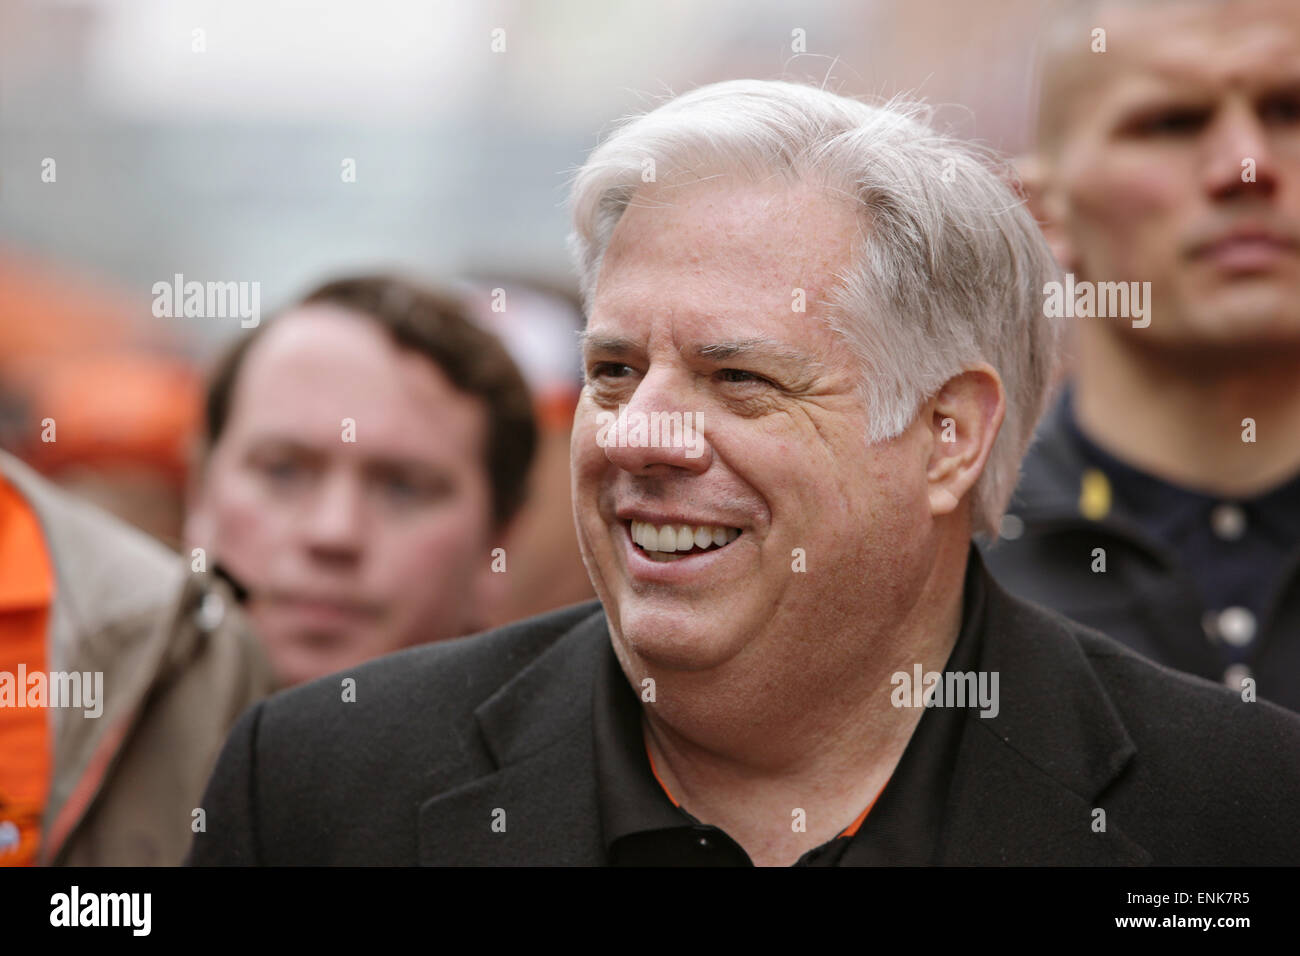 Governor of Maryland Larry Hogan during baseball Opening Day by at Oriole Park in Camden Yards April 10, 2015 in Baltimore, Maryland. Stock Photo